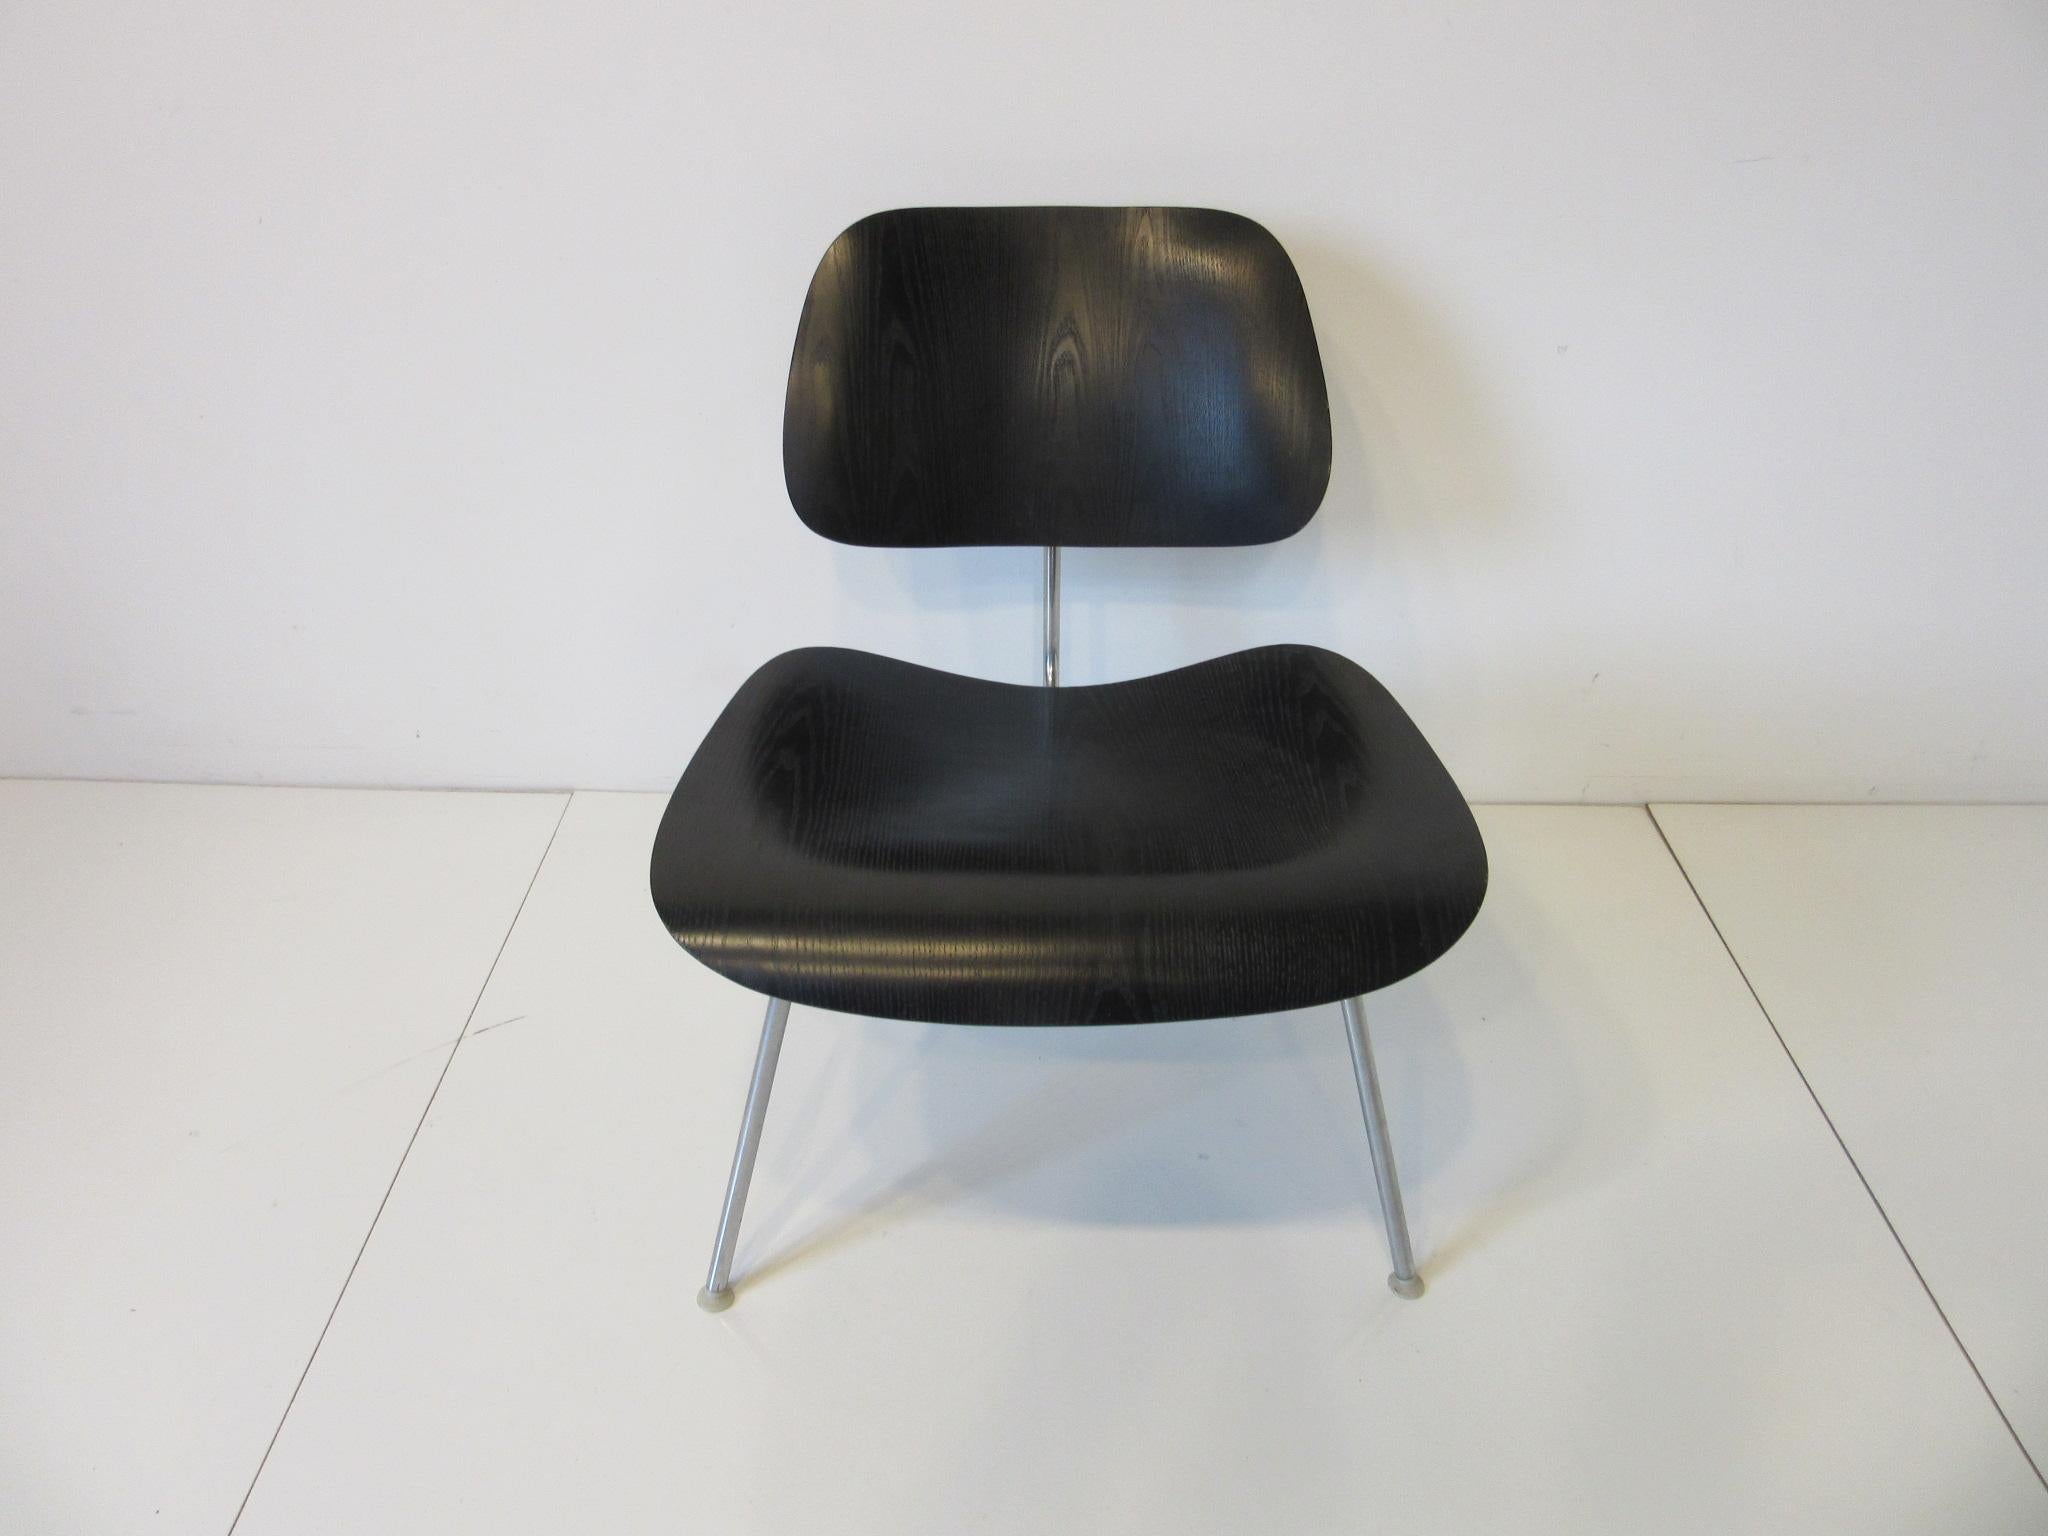 A black bent plywood LCM (lounge chair metal) chrome framed chair with nylon feet designed by Ray and Charles Eames manufactured by the Herman Miller Furniture Company.